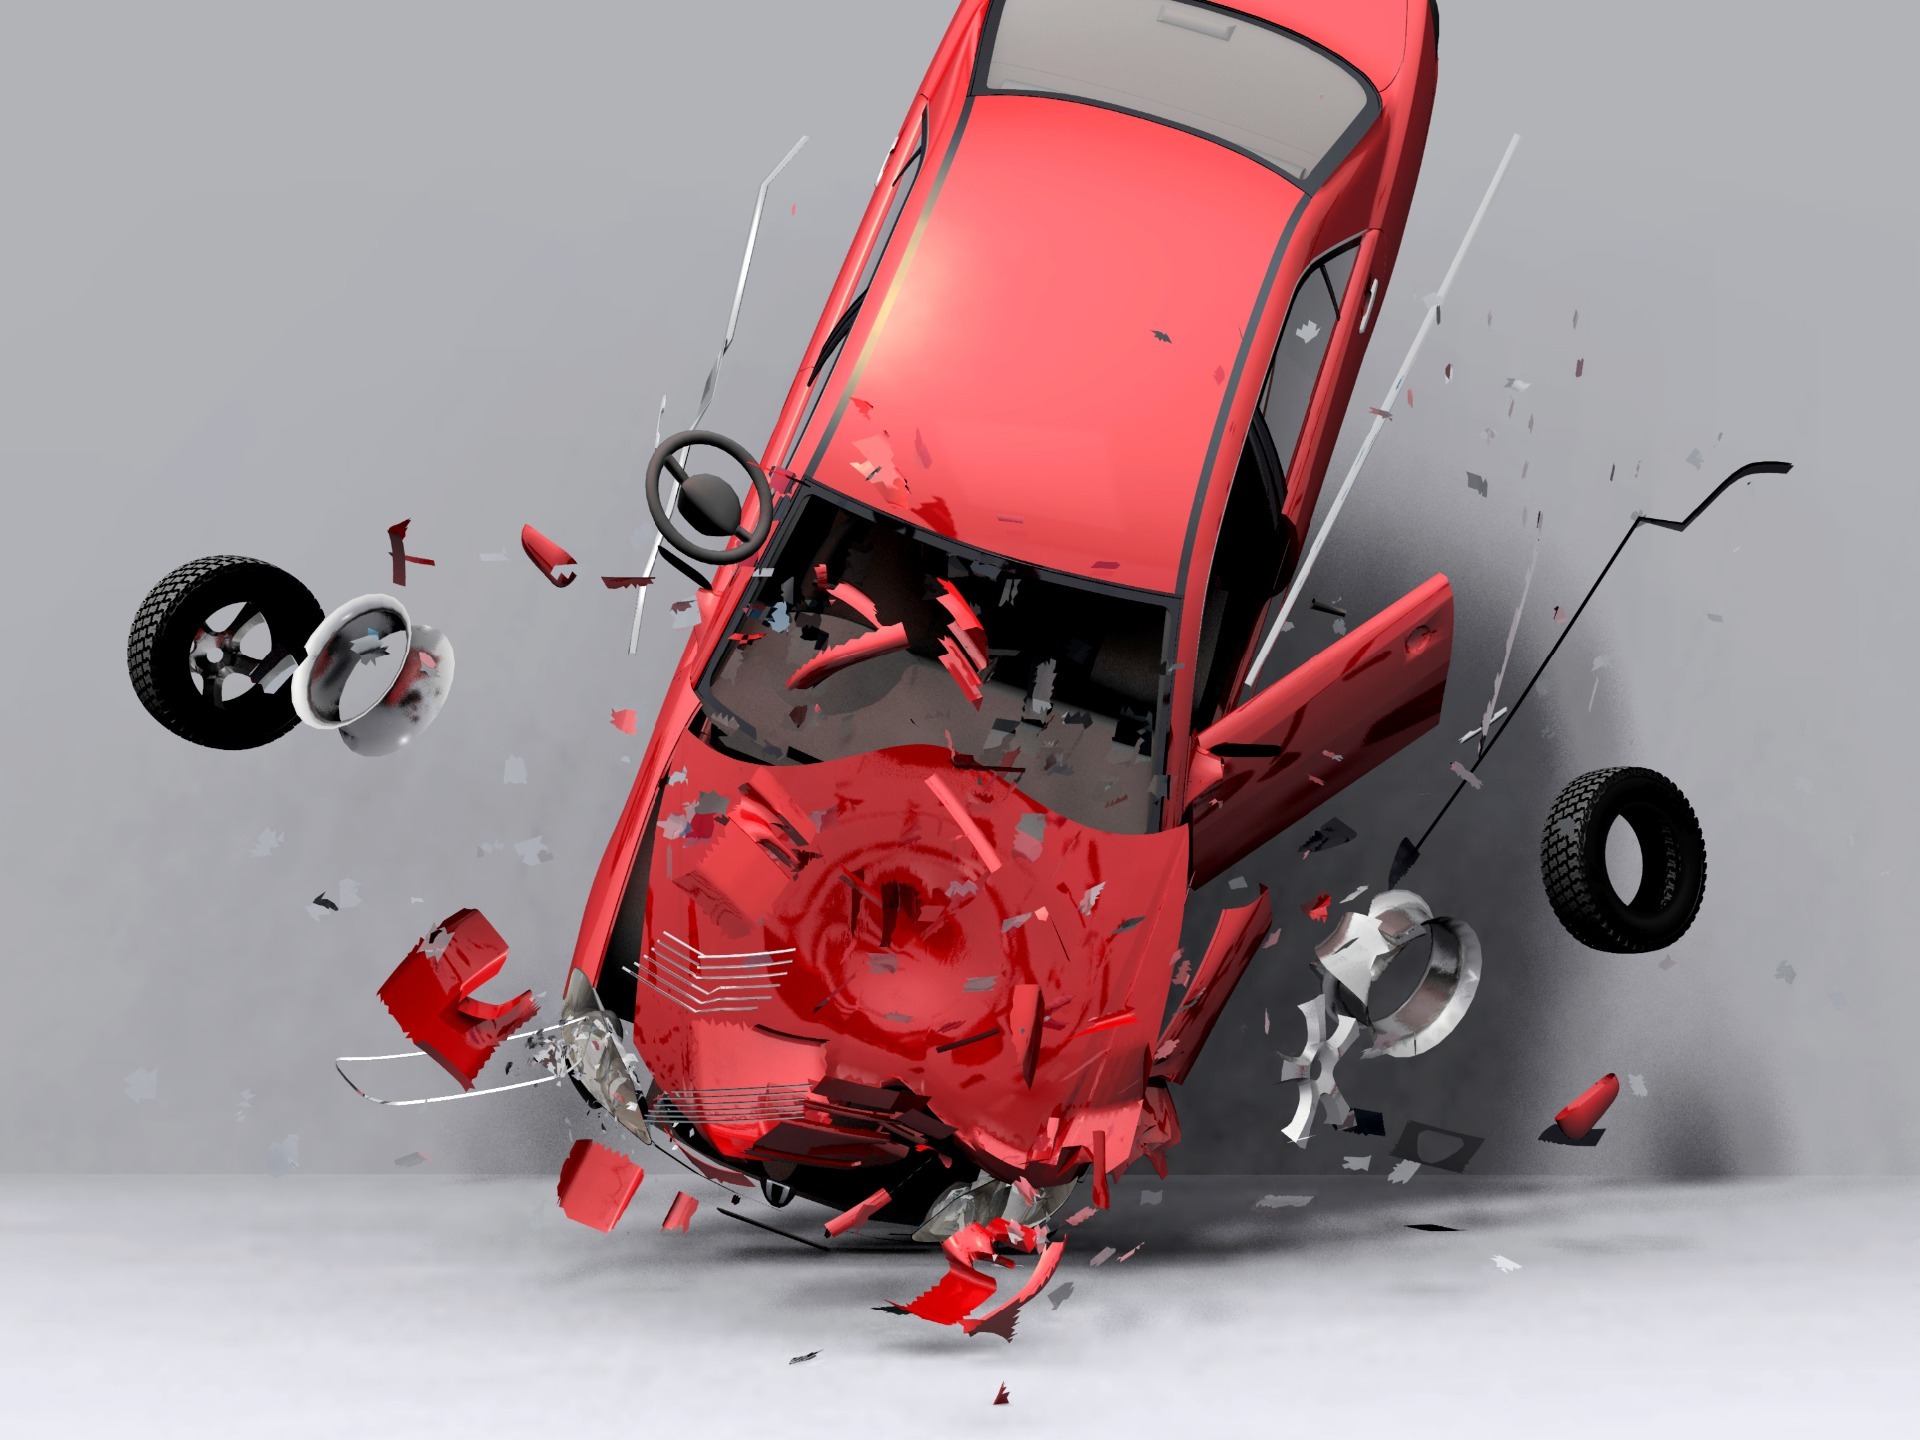 A red car which has been in an accident, smashed from the front, the tires have flown off.